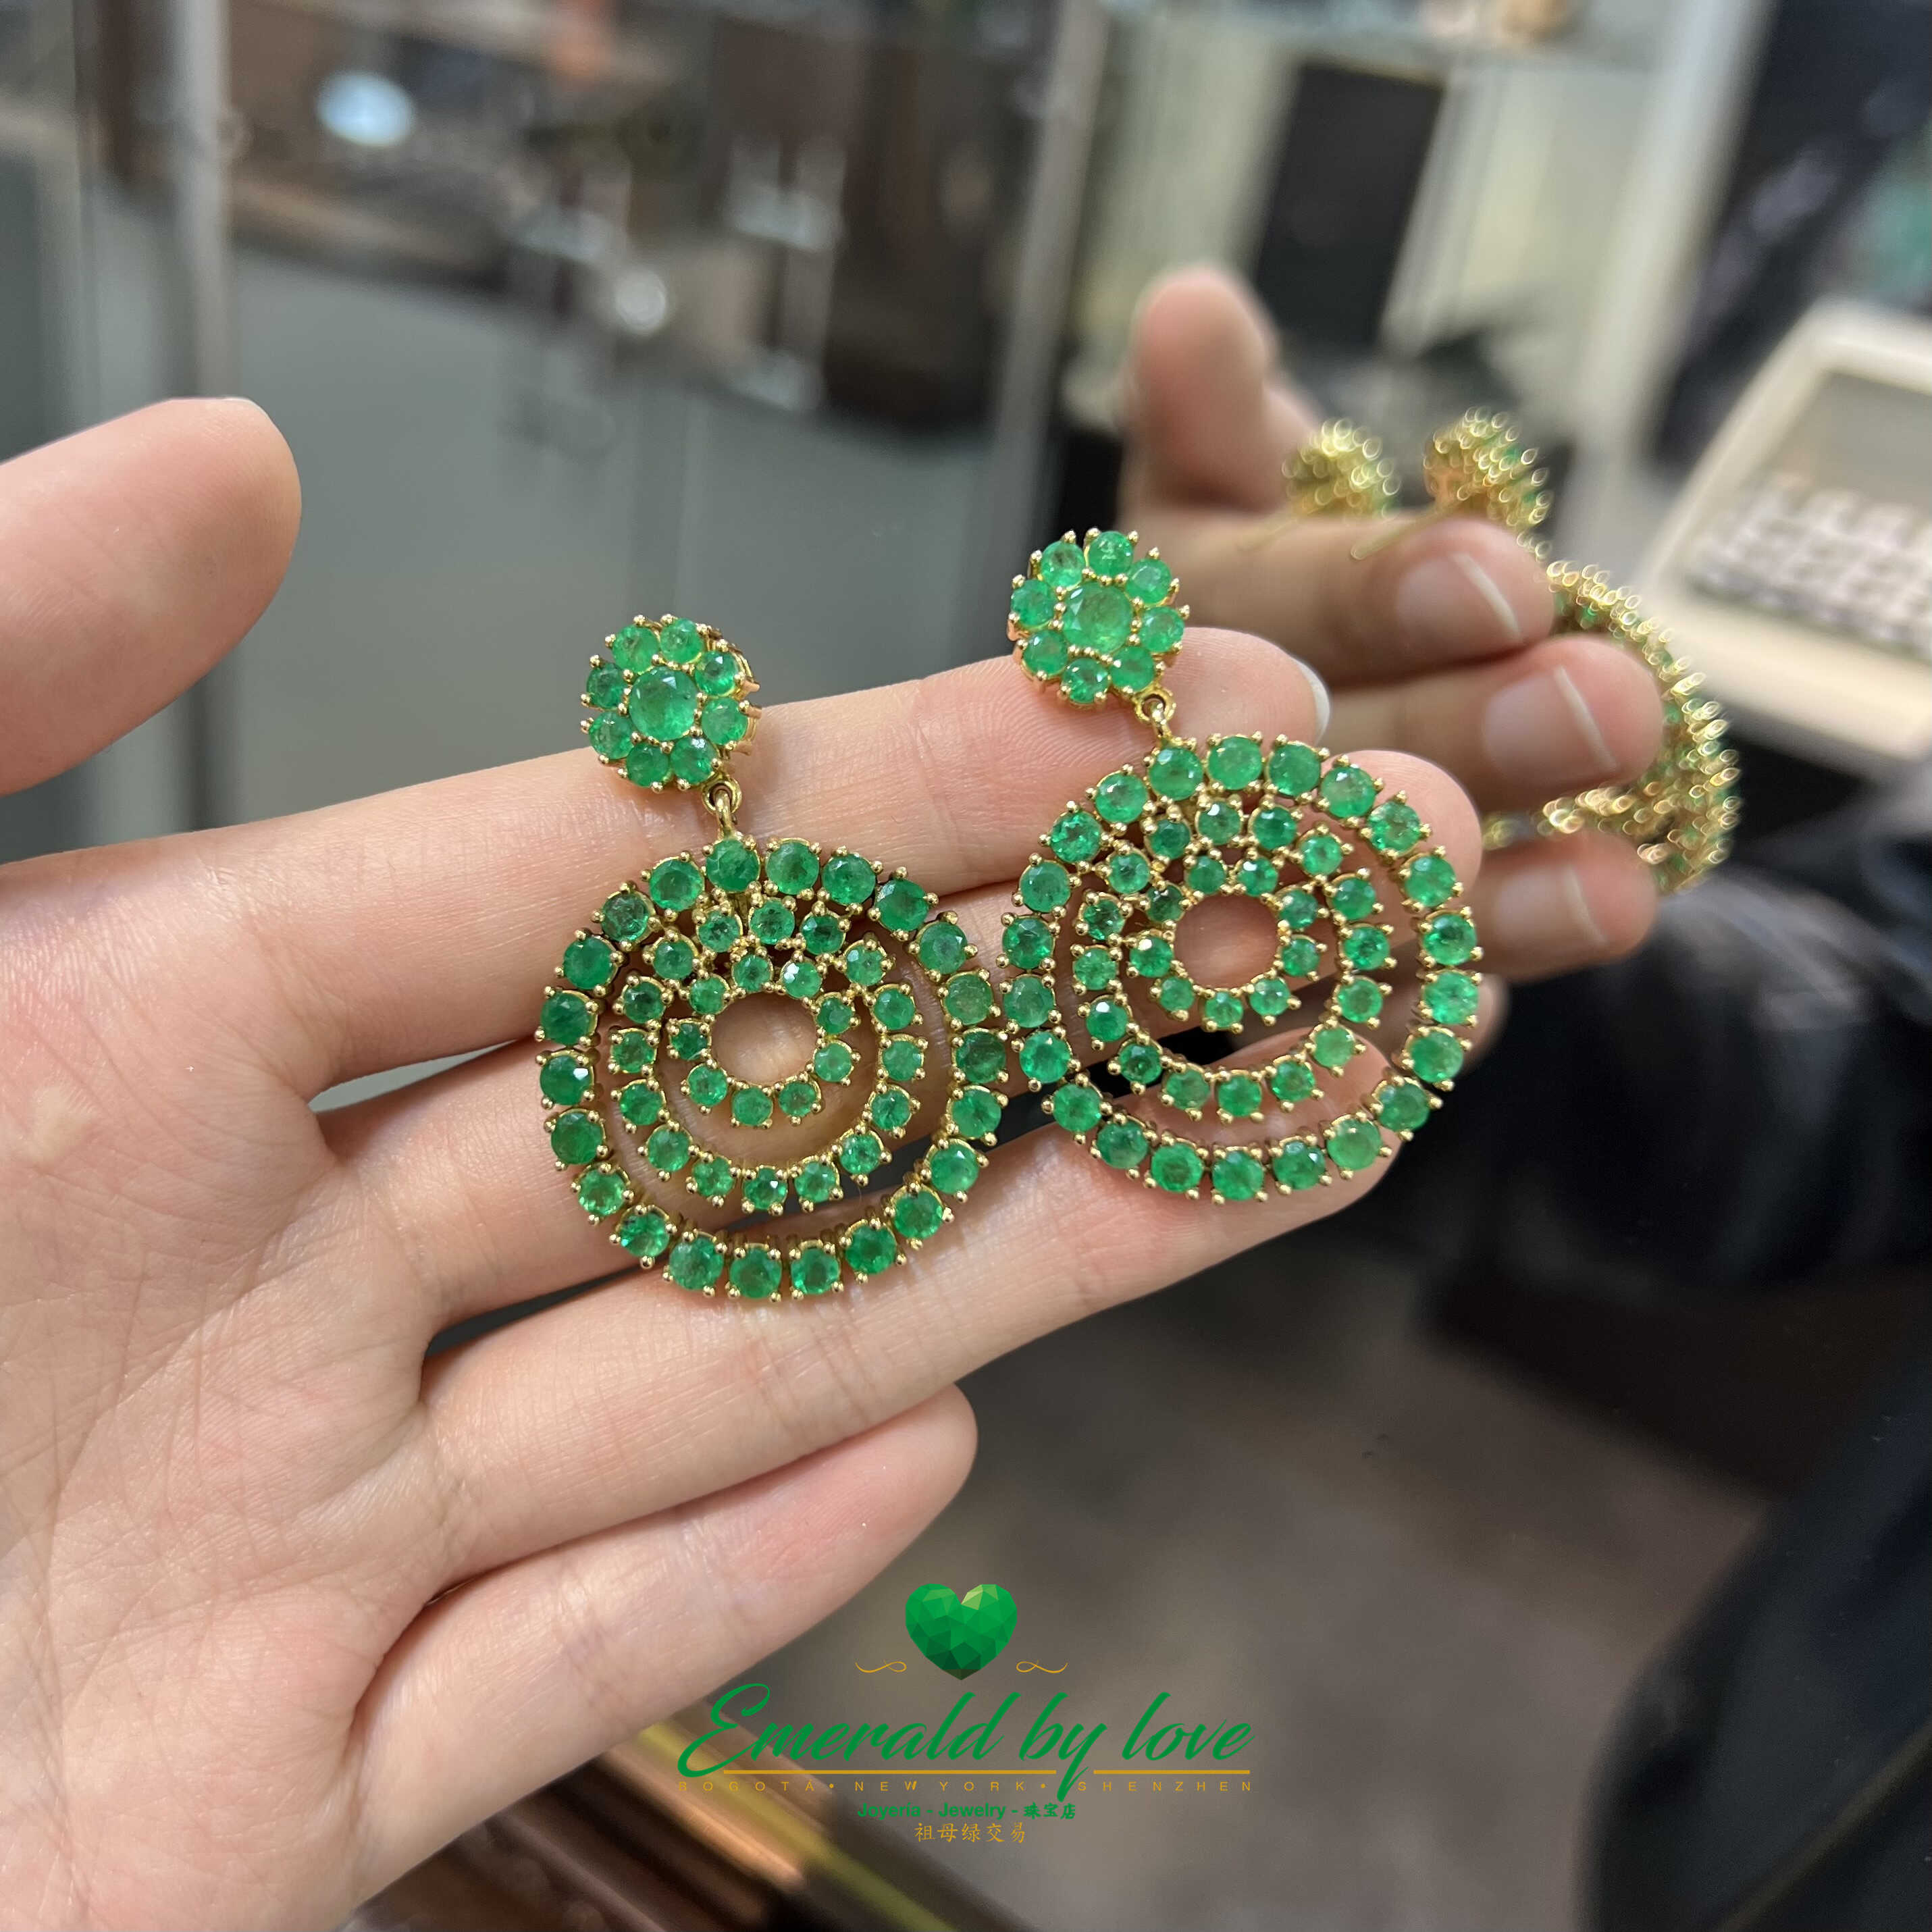 Impressive Elegance: 18k Yellow Gold Earrings with 10.94 tcw Colombian Round Emeralds